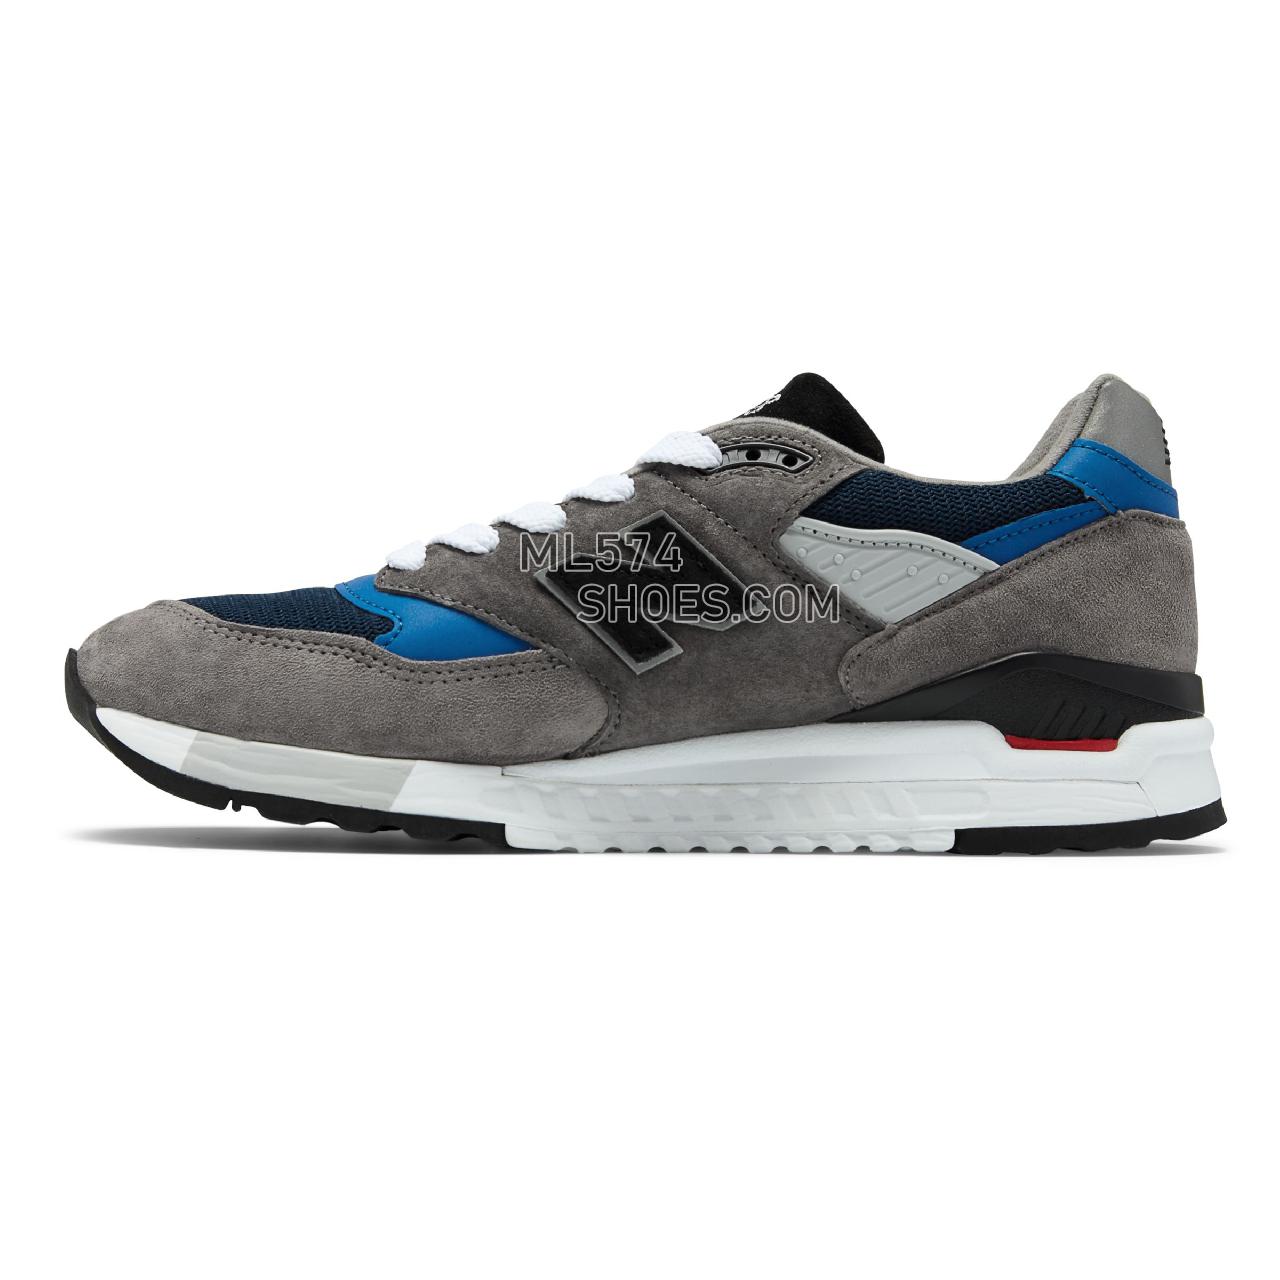 New Balance 998 Made in US - Men's 998 - Classic Grey with Blue - M998NF